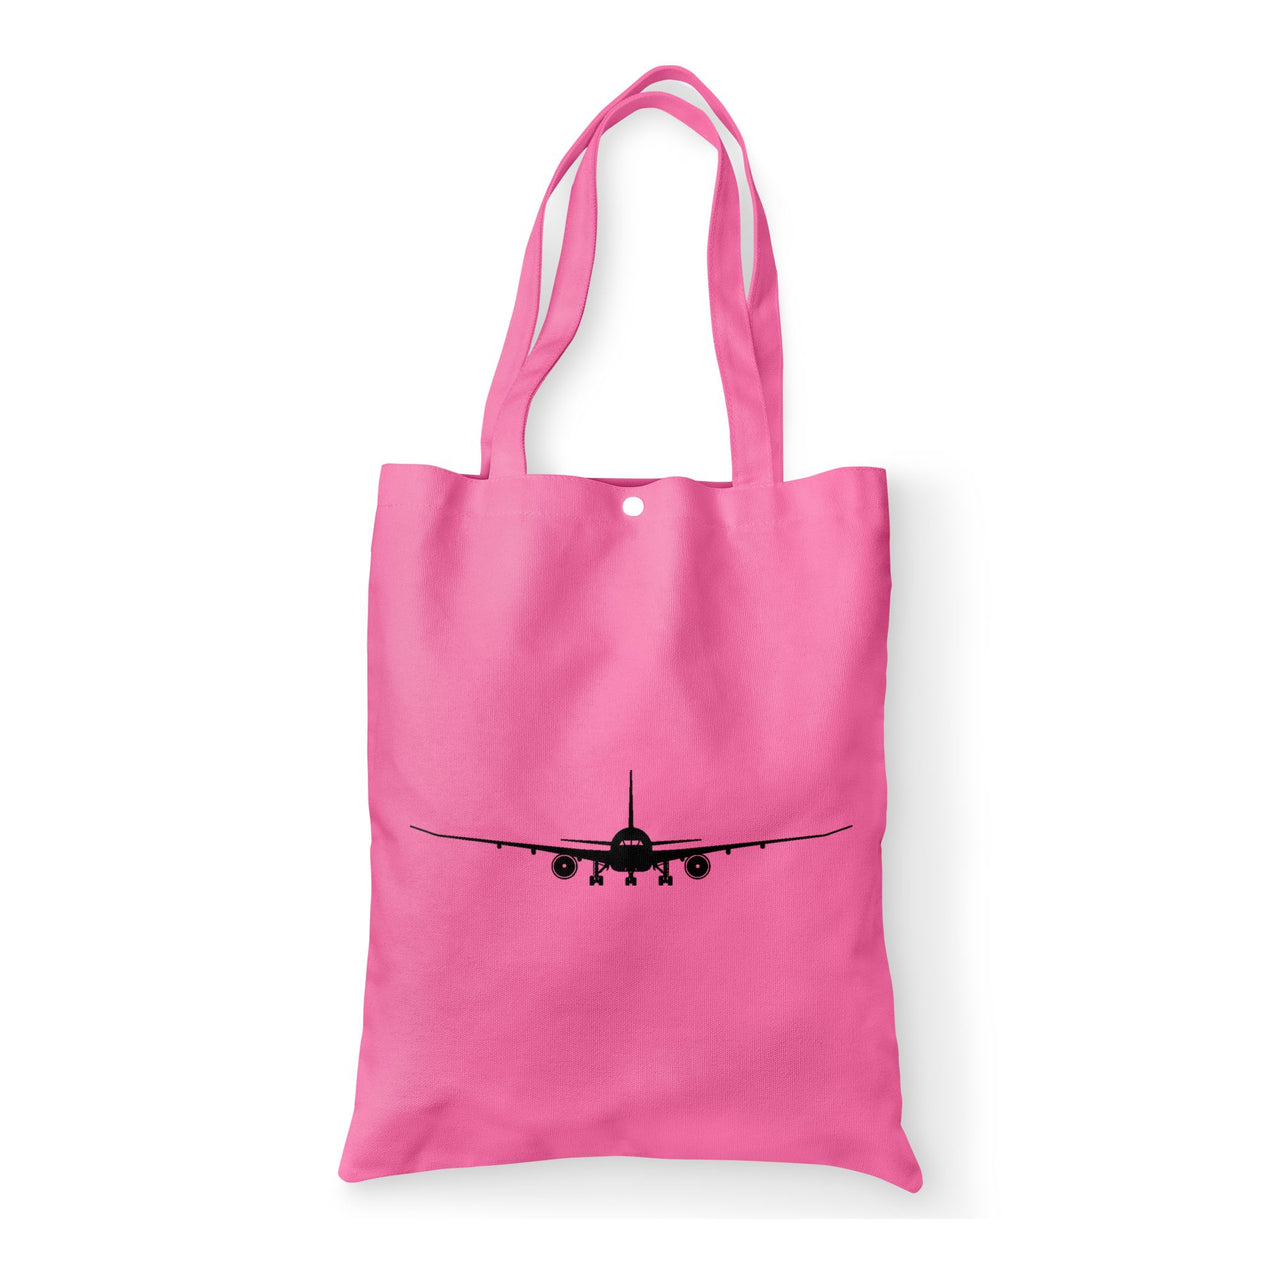 Boeing 787 Silhouette Designed Tote Bags